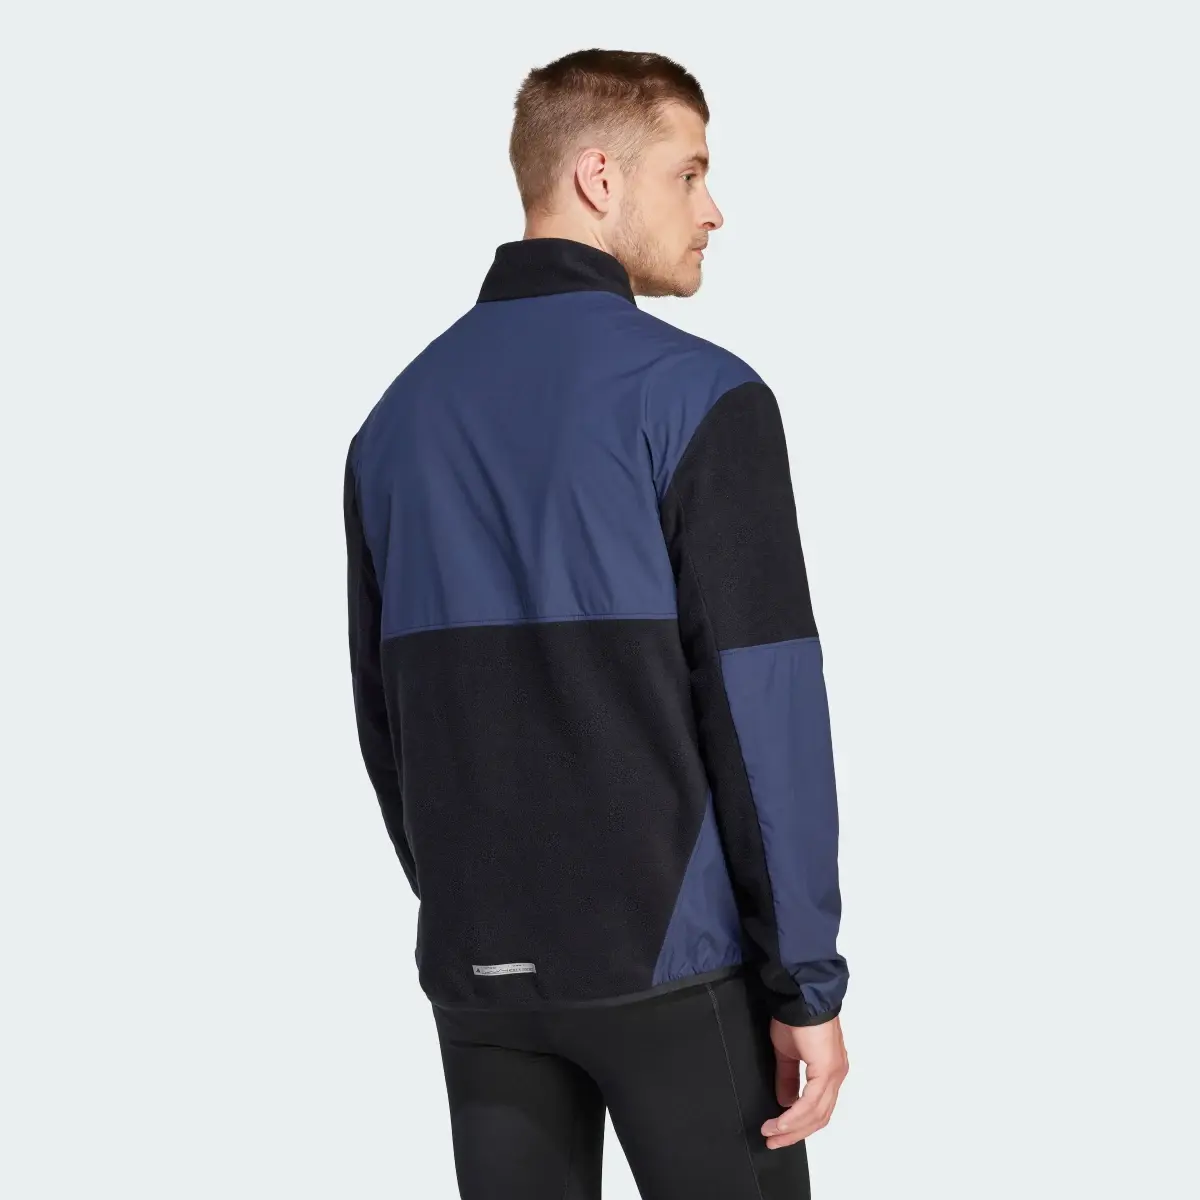 Adidas Ultimate Running Conquer the Elements Jacke. 3